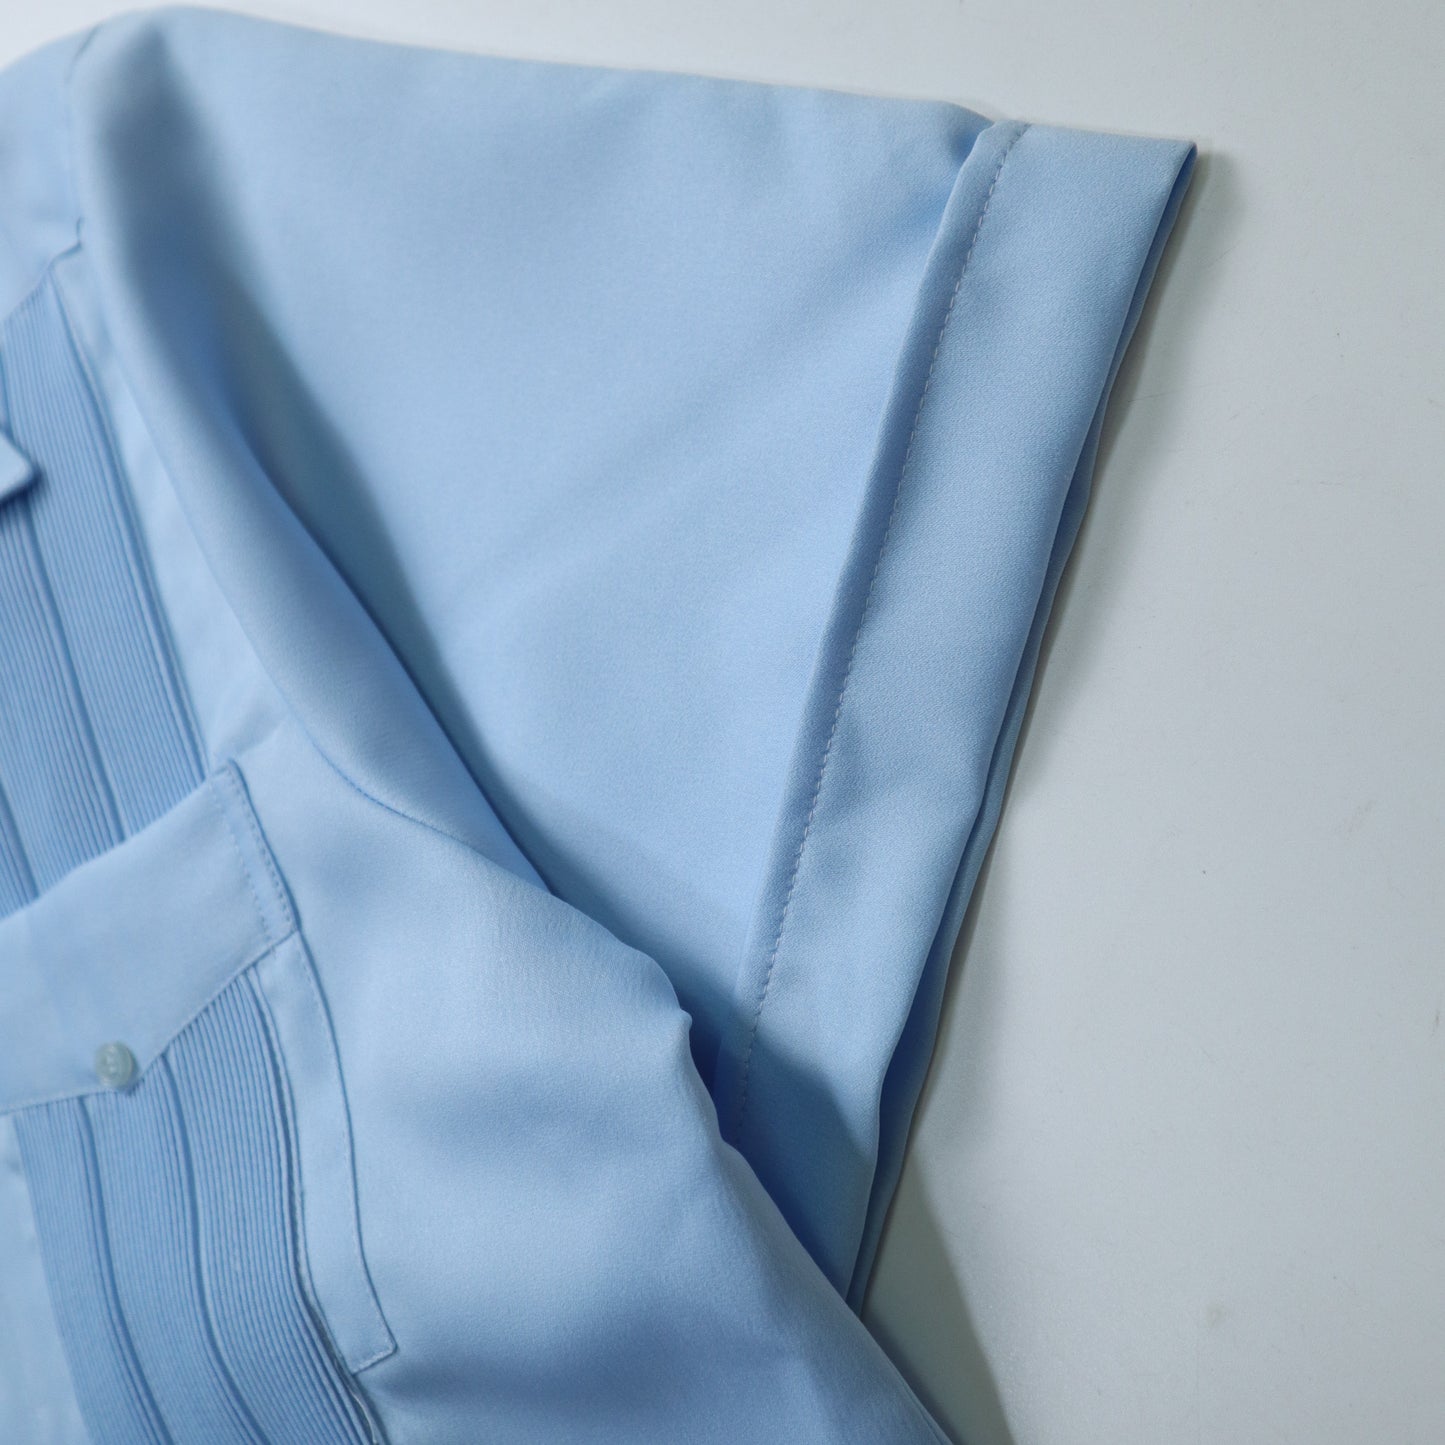 80s/90s aqua blue embroidered three-dimensional striped Cuban shirt made in Mexico